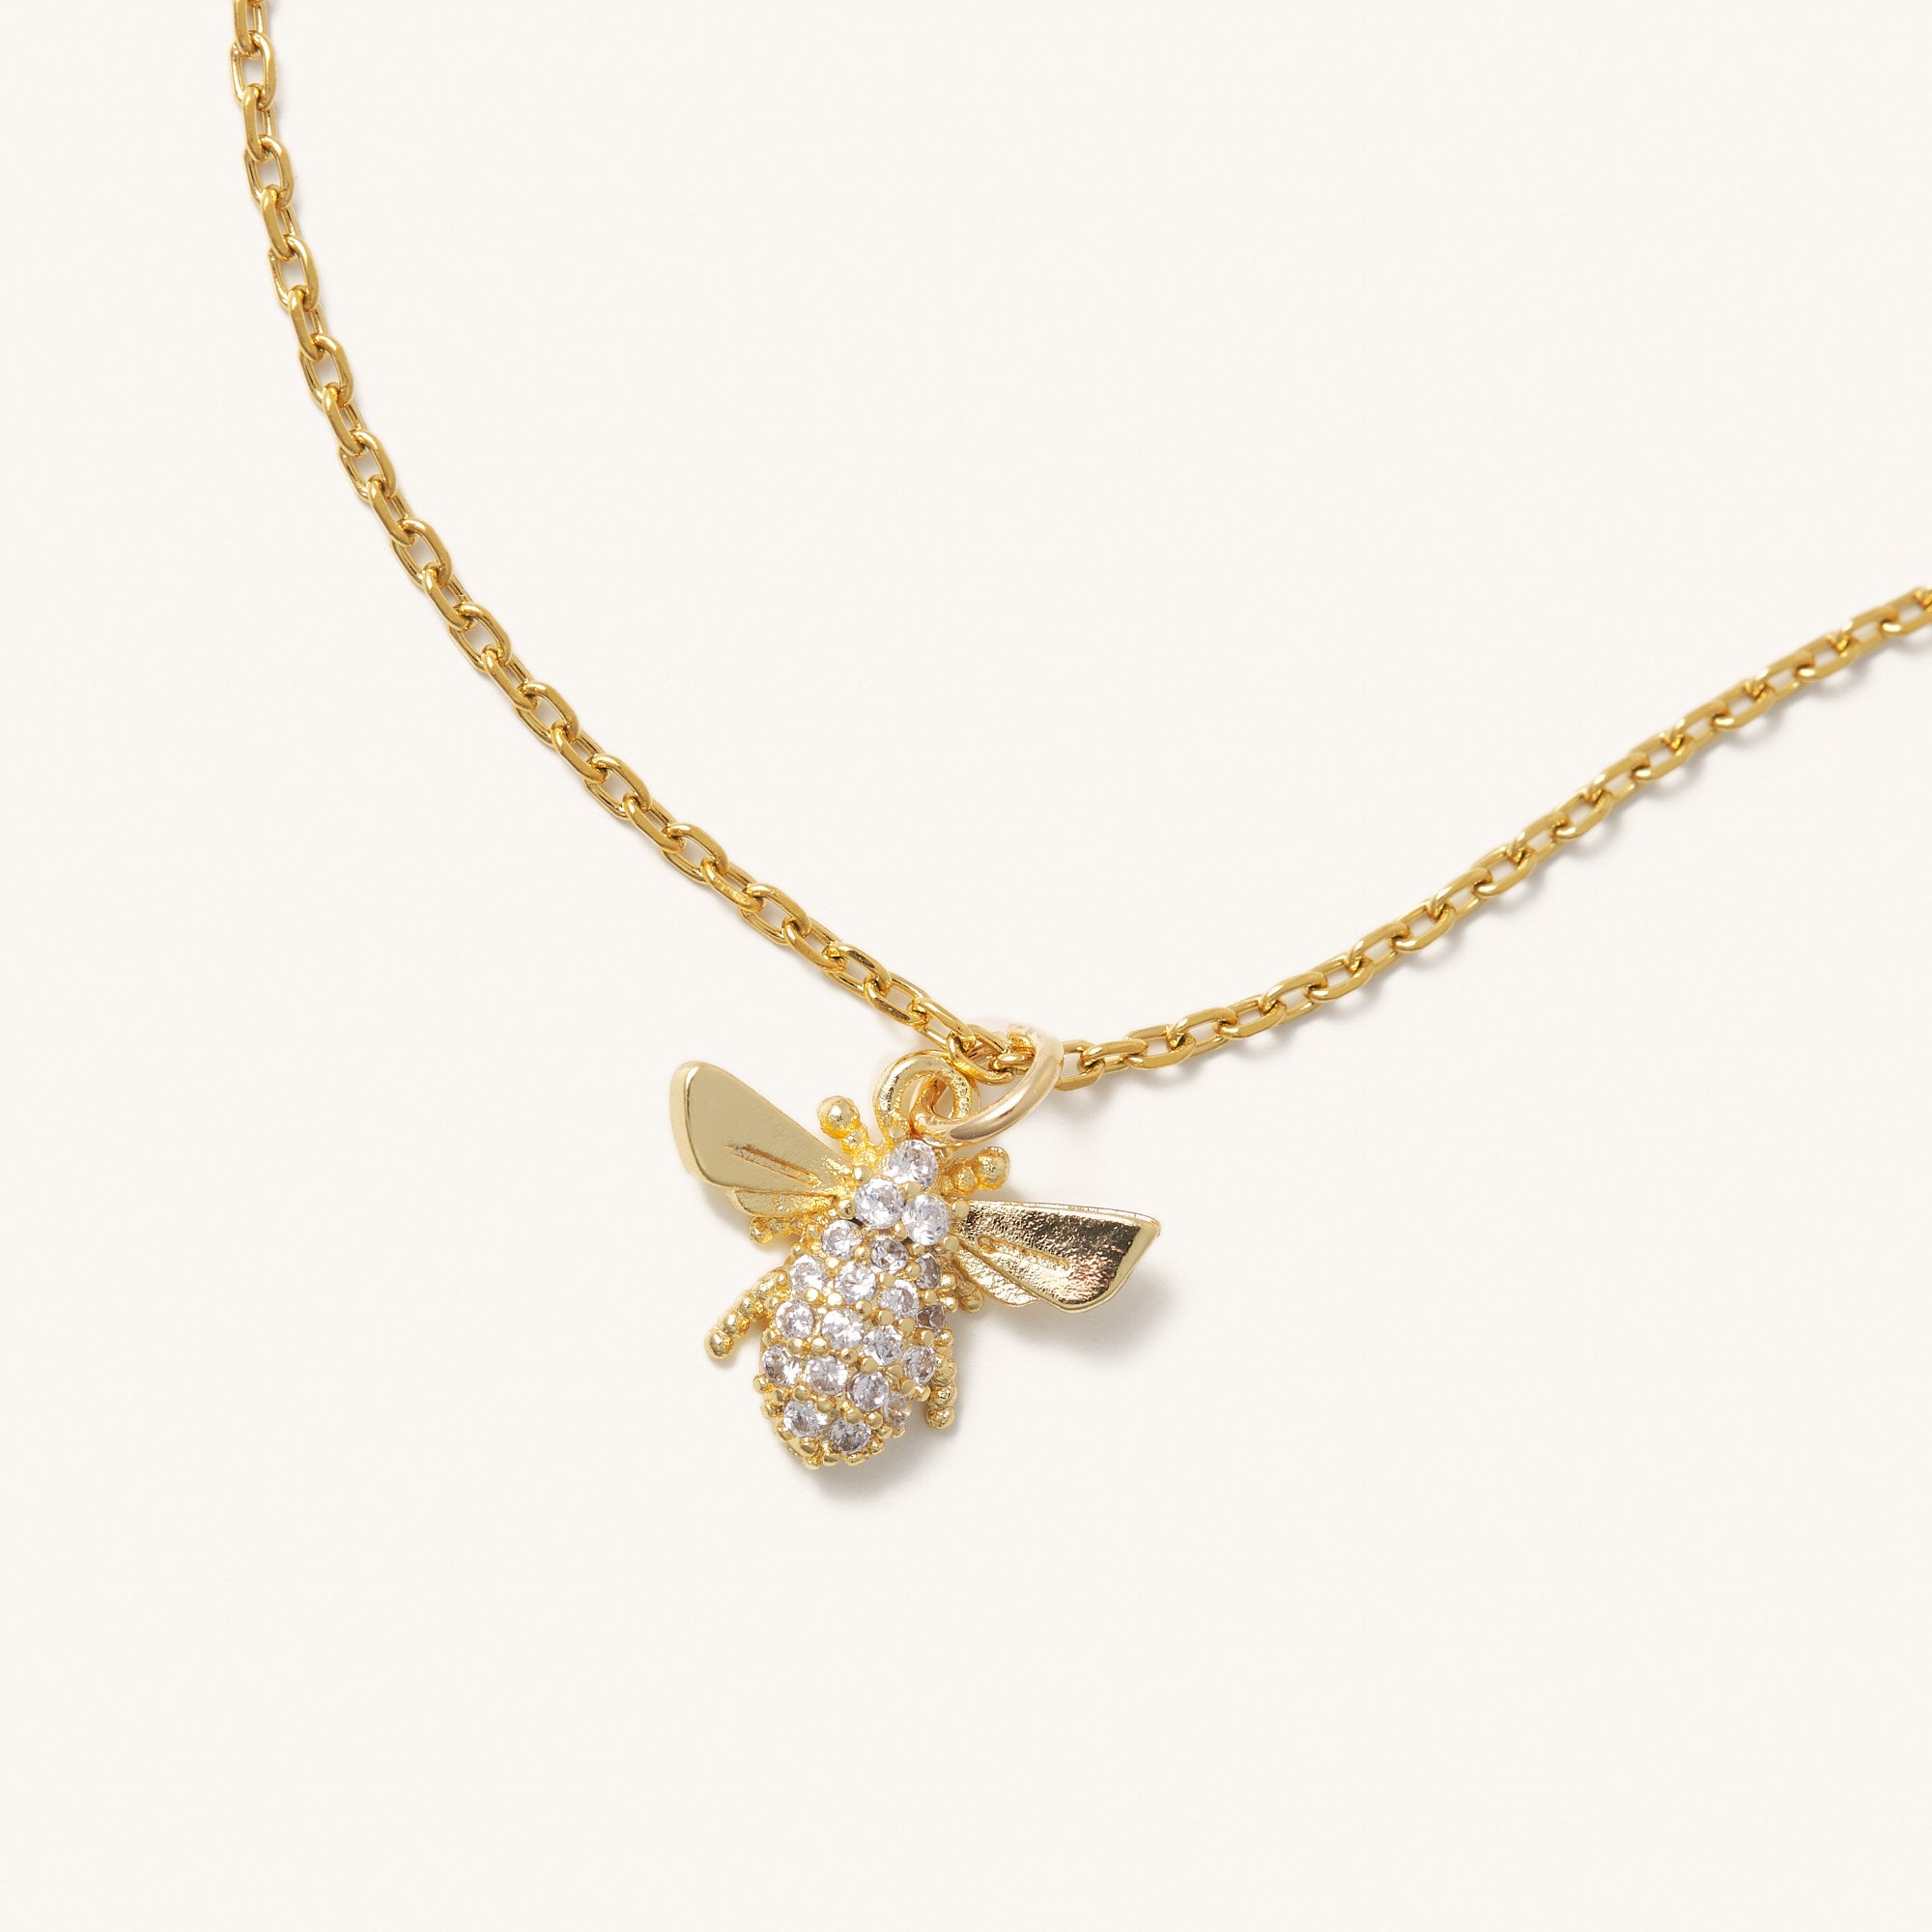 Buy Gold Bee Necklace, Bumble Bee Pendant, Cute Dainty Gold Necklace, Gold  Pendant Necklace, Gold Fill Necklace, Online in India - Etsy